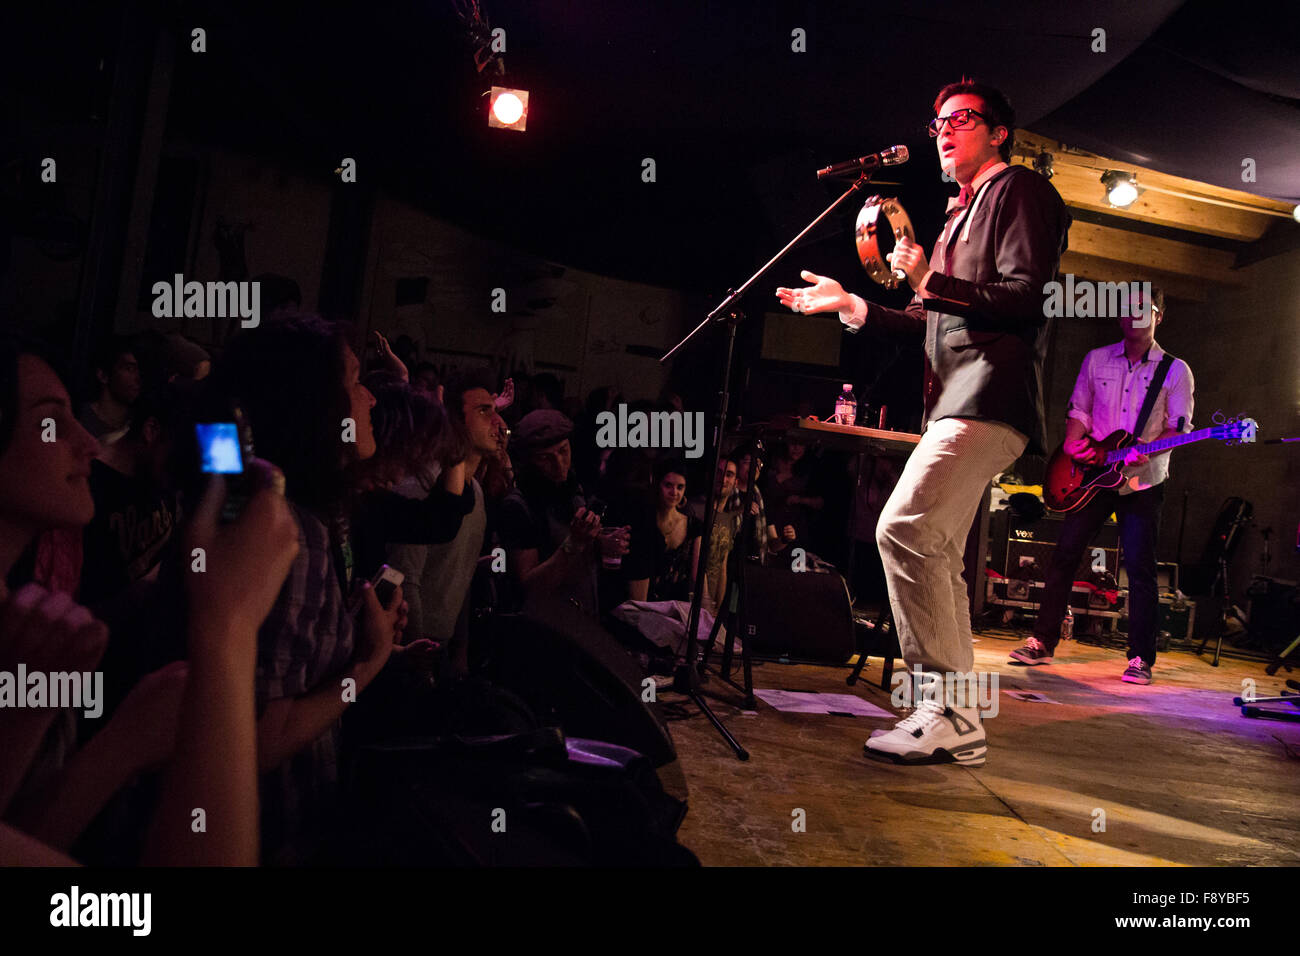 Milan Italy. 27th March 2012. The American singer-songwriter Andrew Mayer Cohen better known by the stage name Mayer Hawthorne p Stock Photo